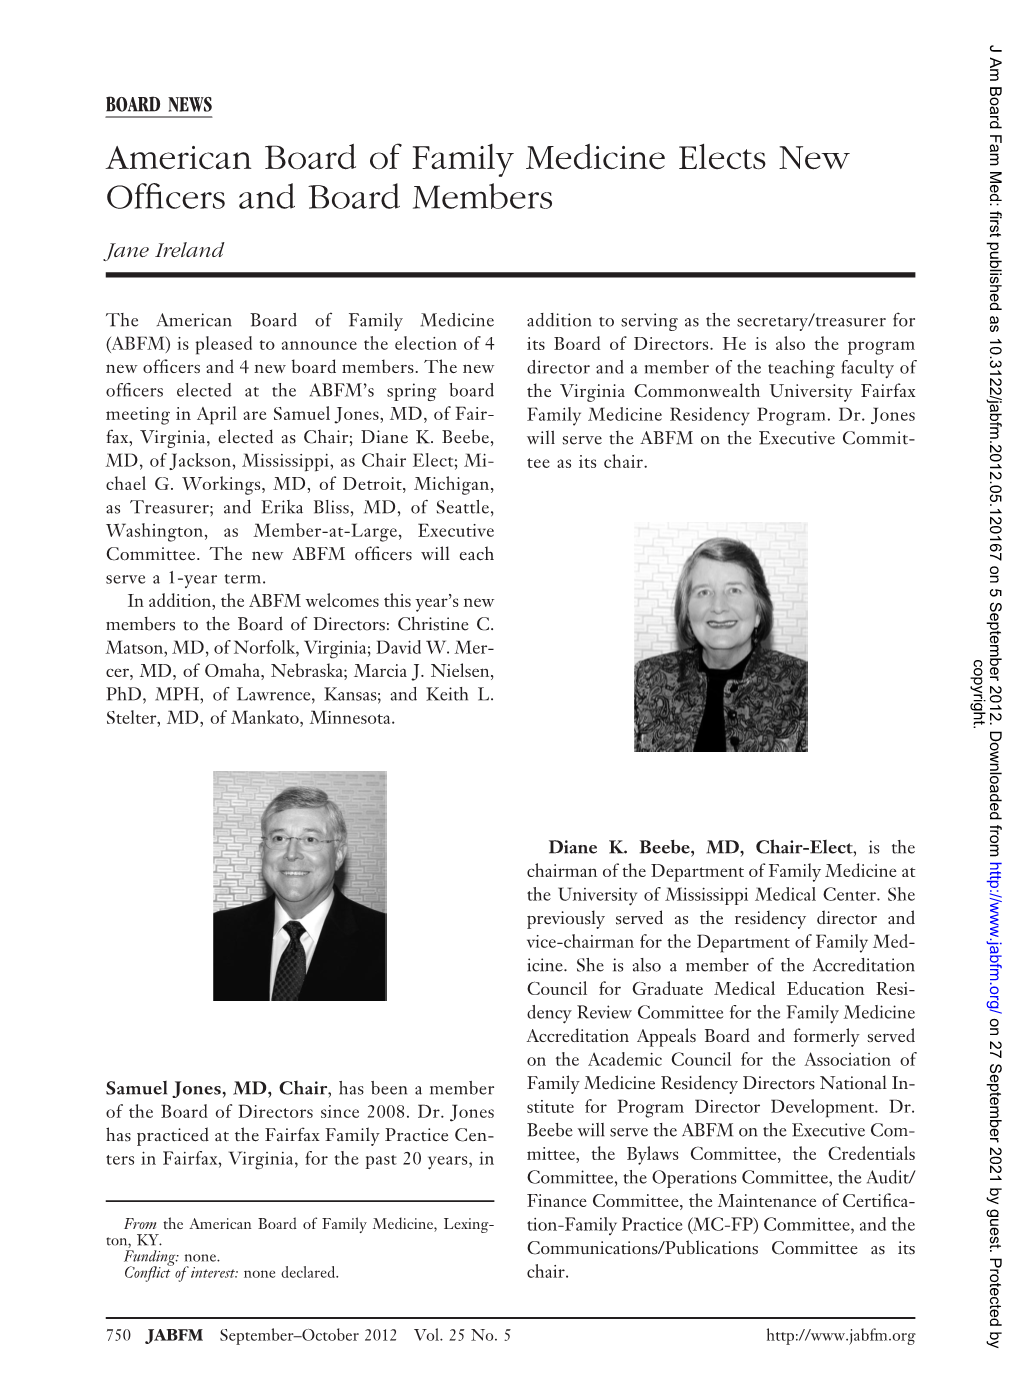 American Board of Family Medicine Elects New Officers and Board